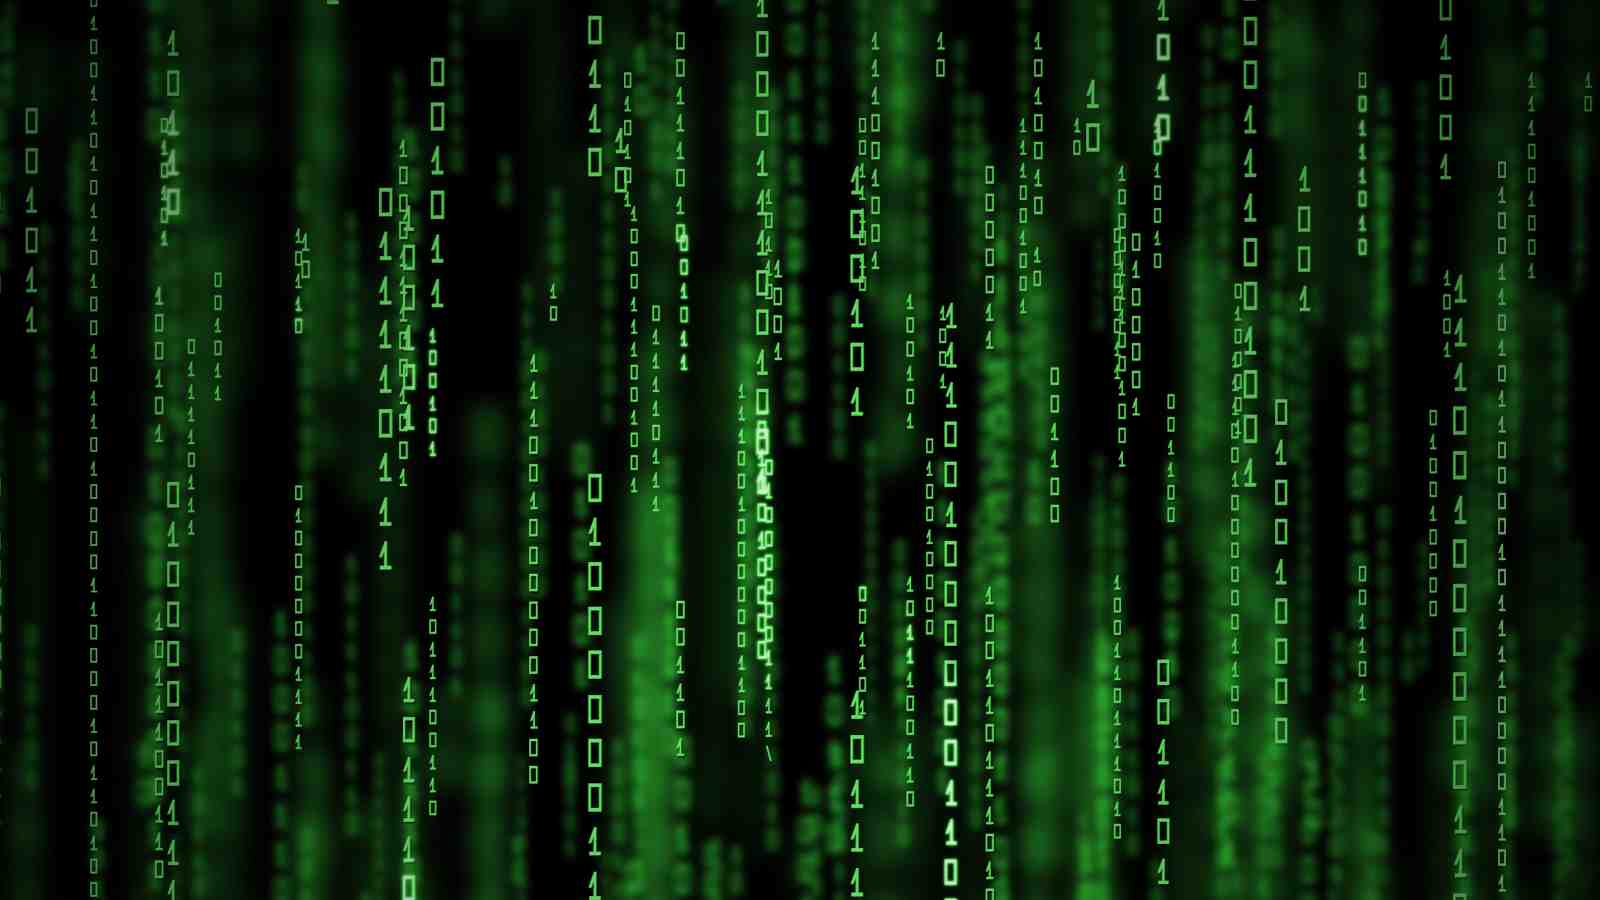 Lines of computer code on a green background.